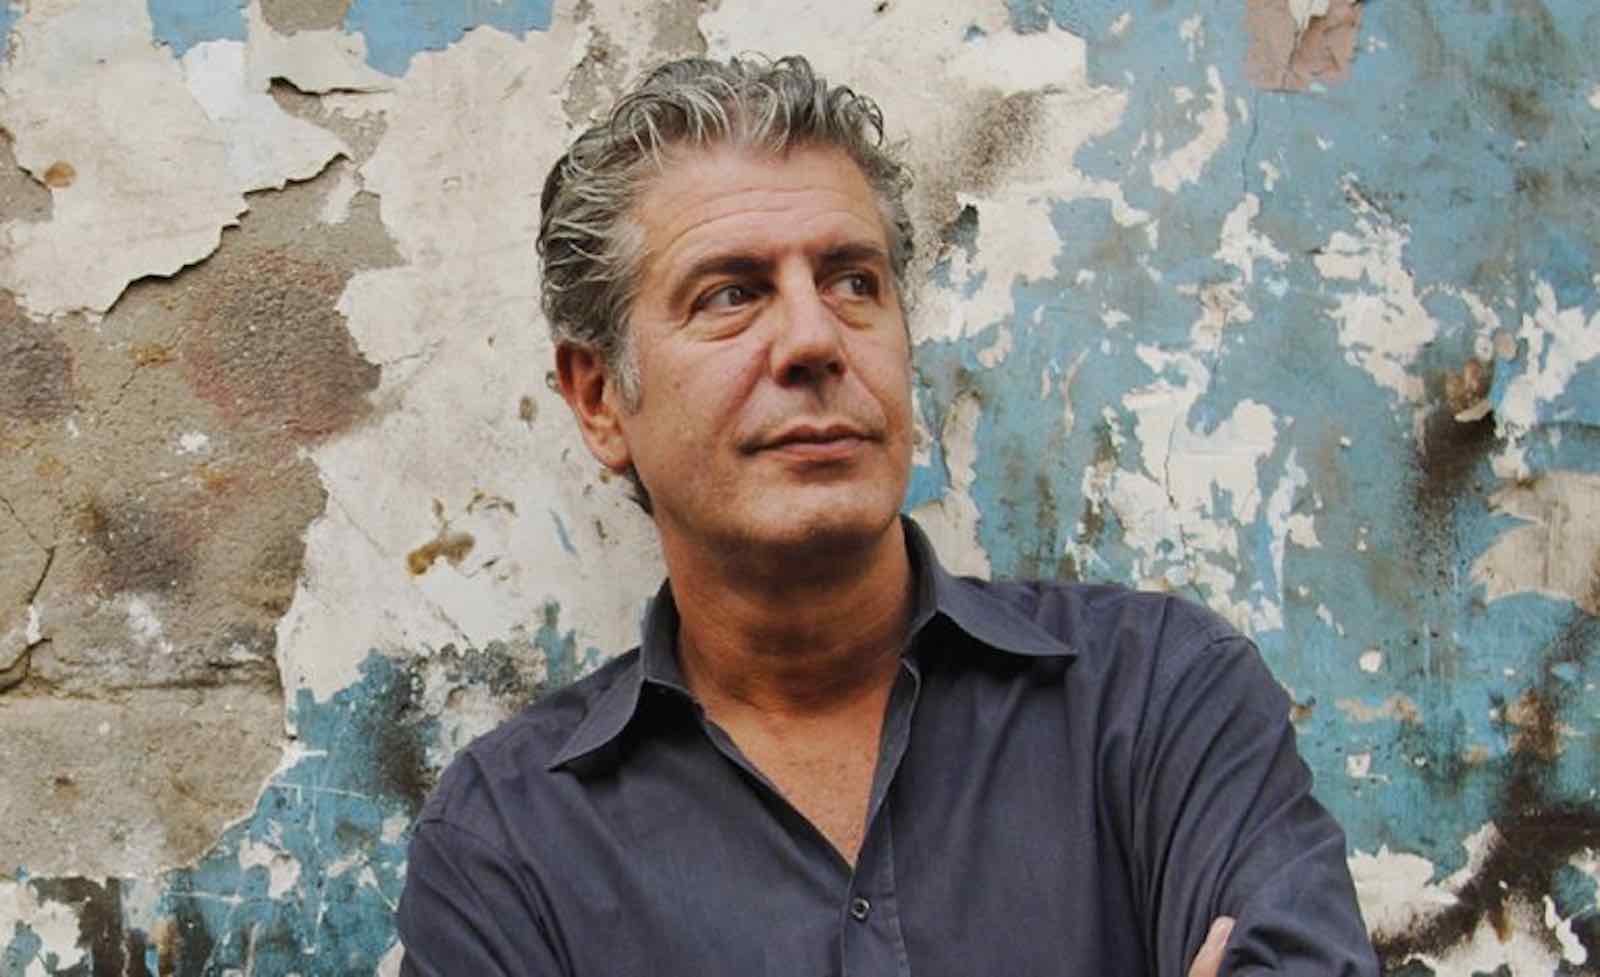 Anthony Bourdain: No Reservations. 